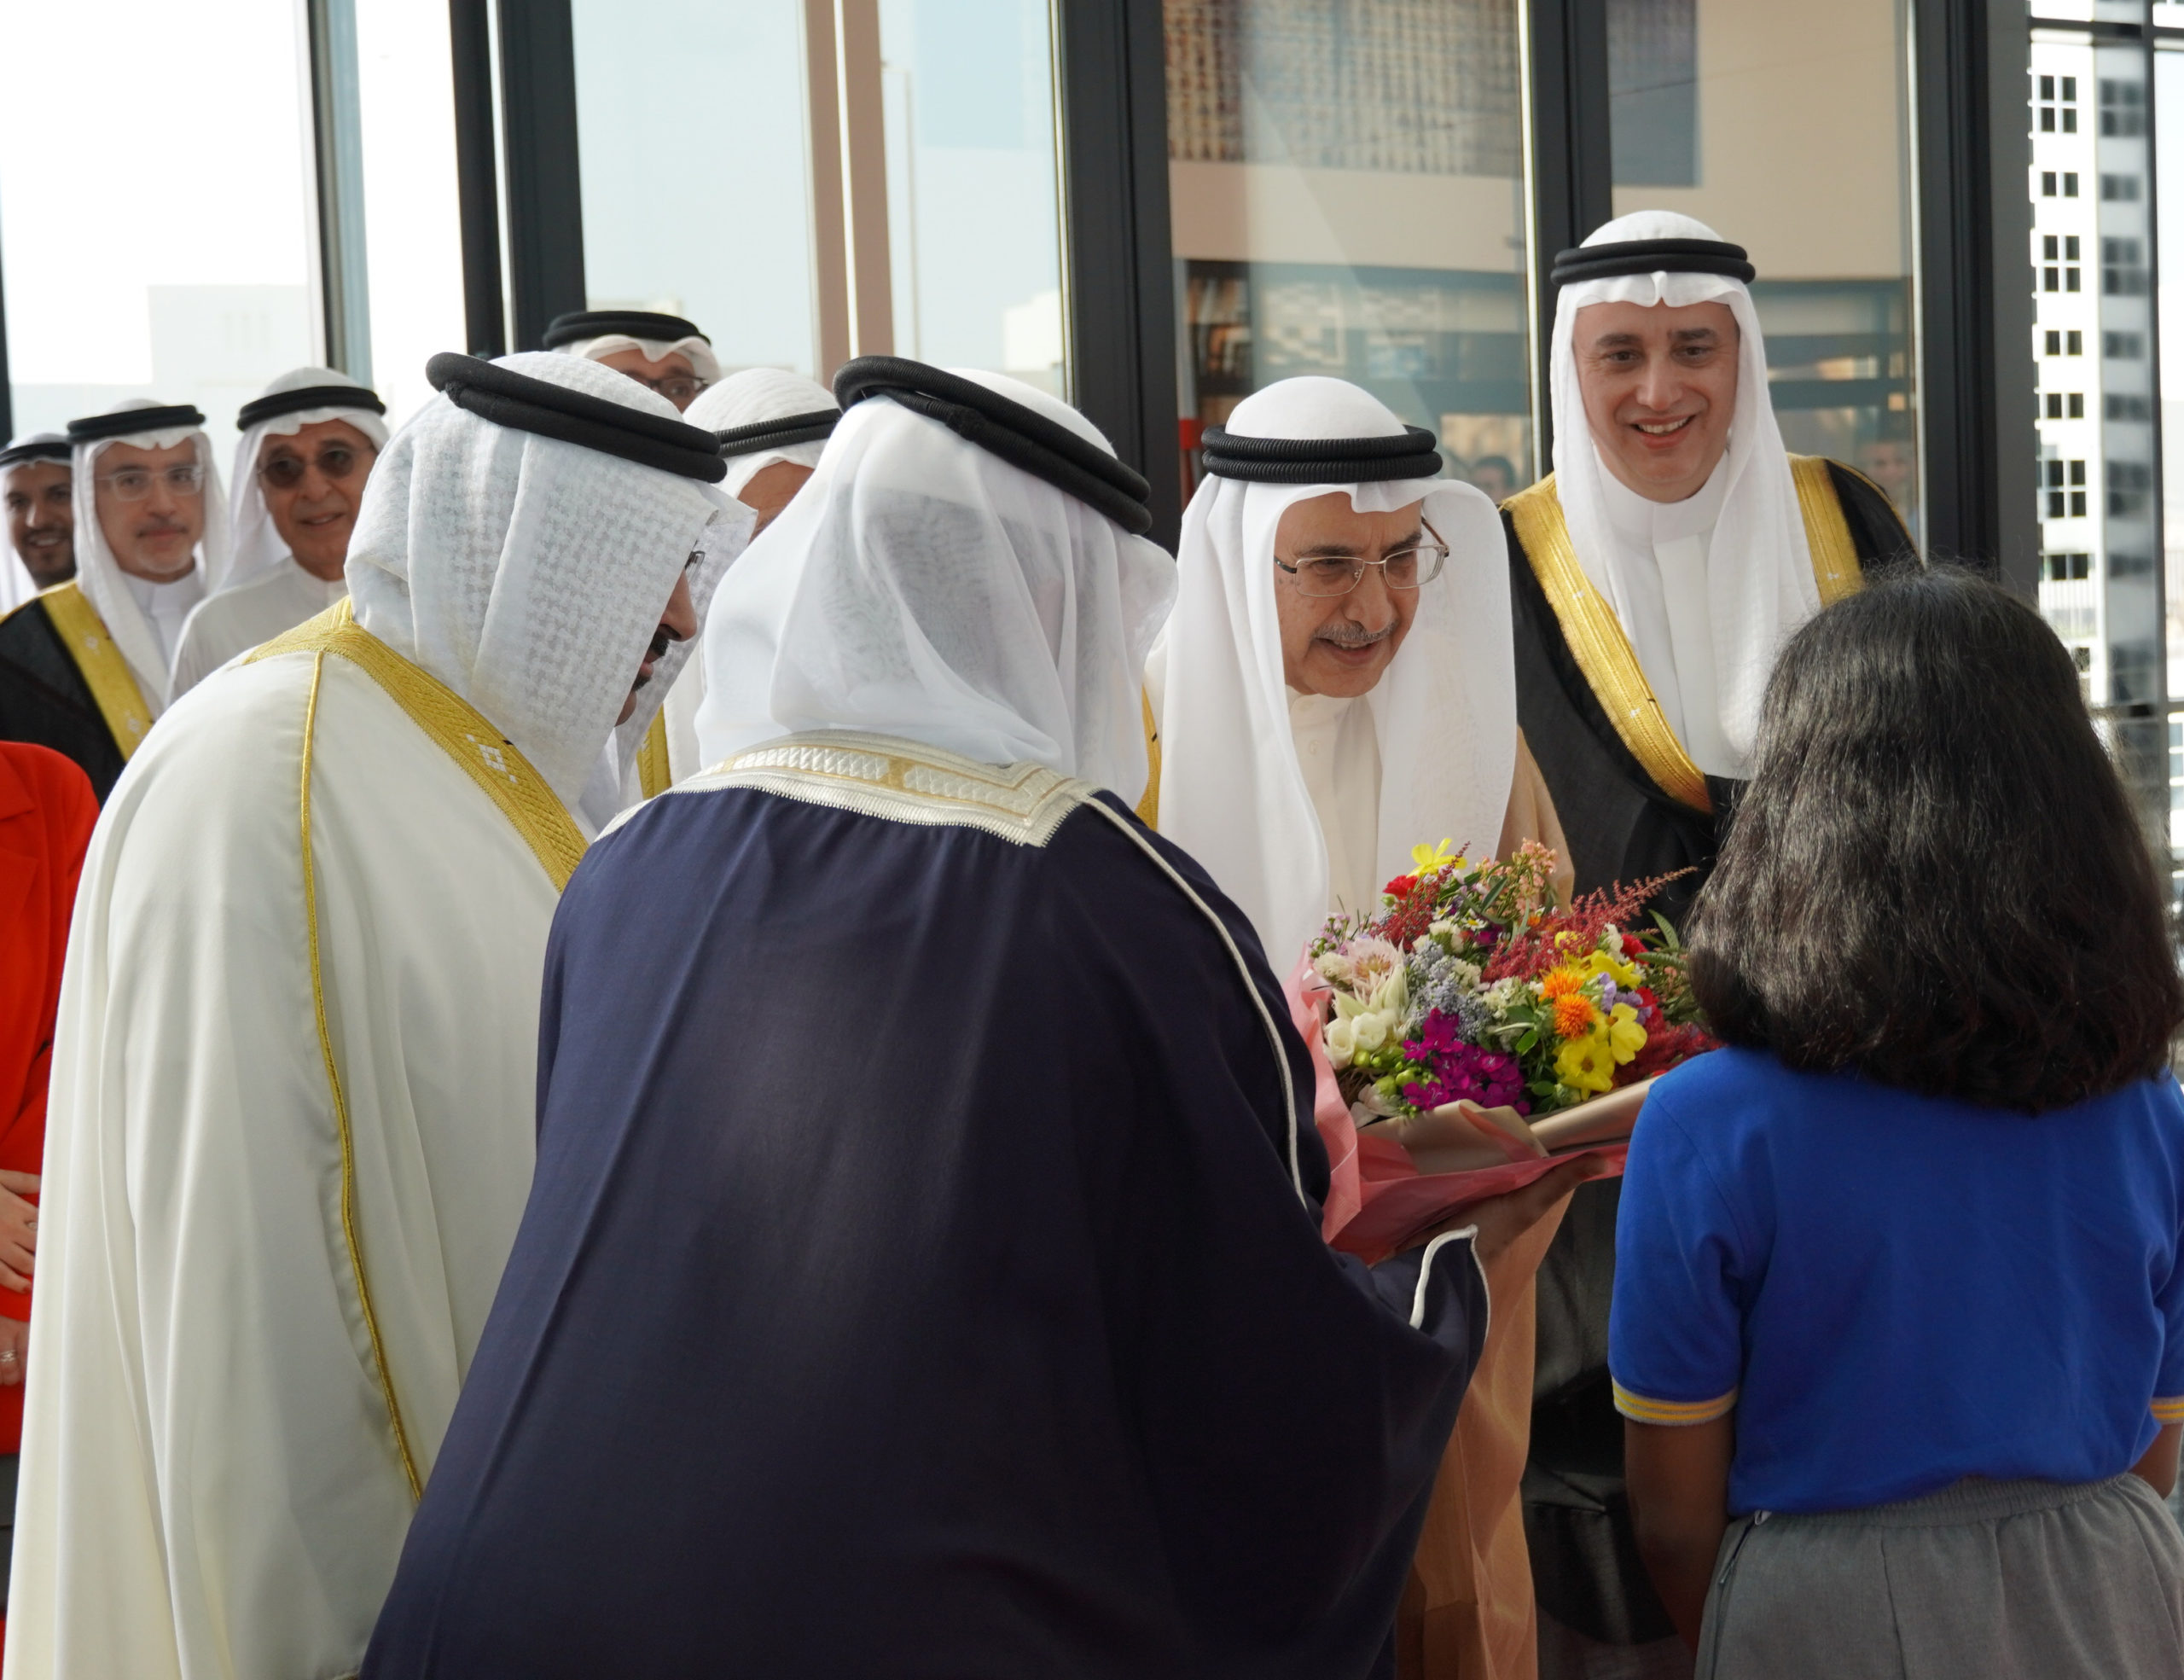 The first educational group in the Kingdom of Bahrain opens its second independent school under the ARKEDU Group.